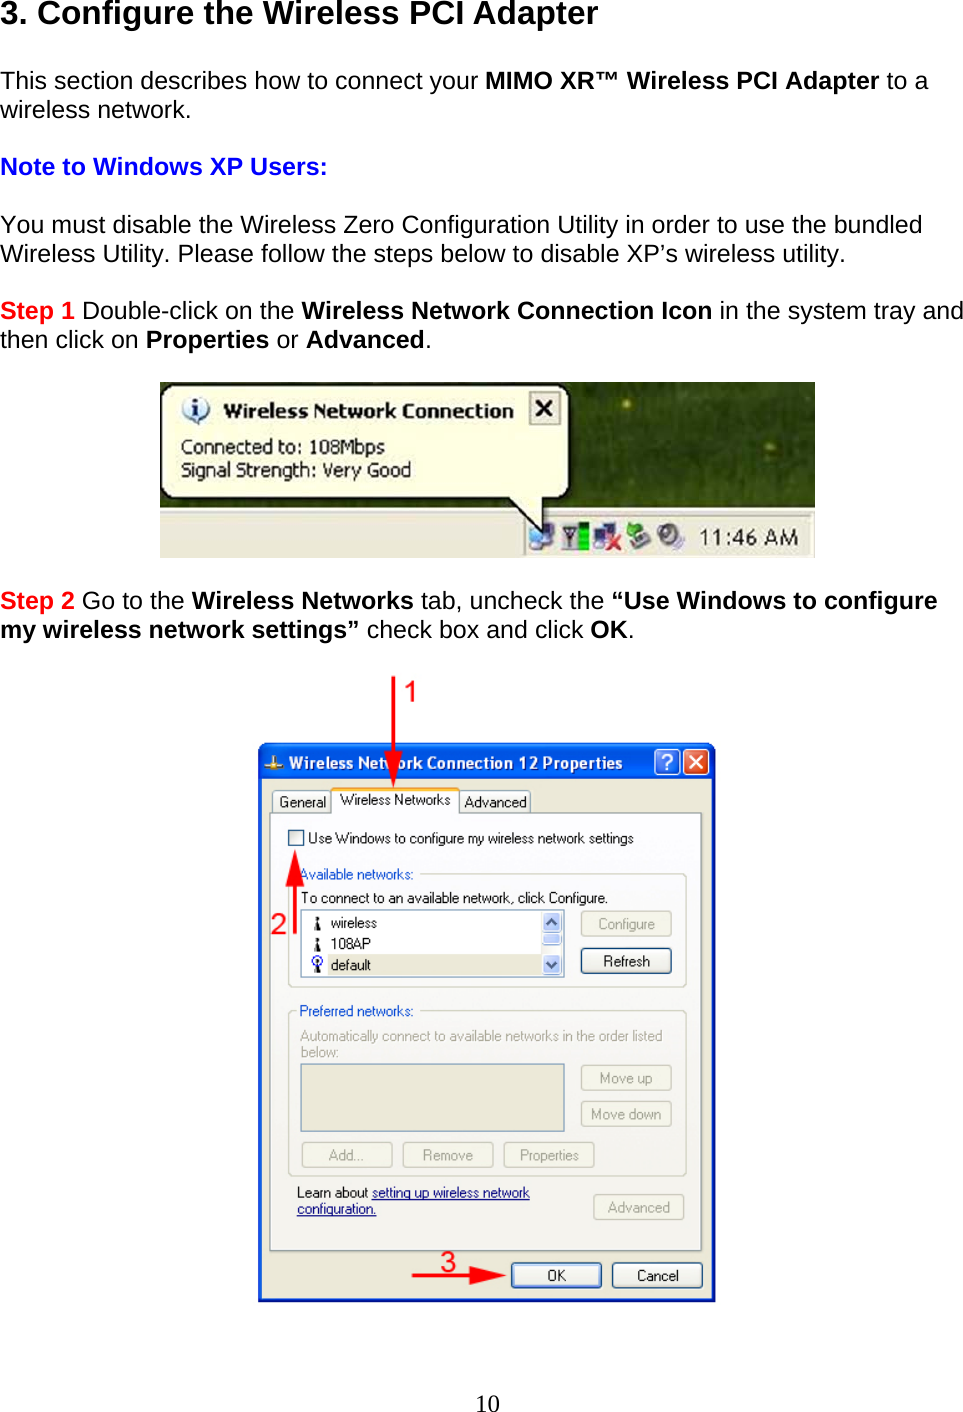 3. Configure the Wireless PCI Adapter  This section describes how to connect your MIMO XR™ Wireless PCI Adapter to a wireless network.  Note to Windows XP Users:  You must disable the Wireless Zero Configuration Utility in order to use the bundled Wireless Utility. Please follow the steps below to disable XP’s wireless utility.  Step 1 Double-click on the Wireless Network Connection Icon in the system tray and then click on Properties or Advanced.    Step 2 Go to the Wireless Networks tab, uncheck the “Use Windows to configure my wireless network settings” check box and click OK.    10 